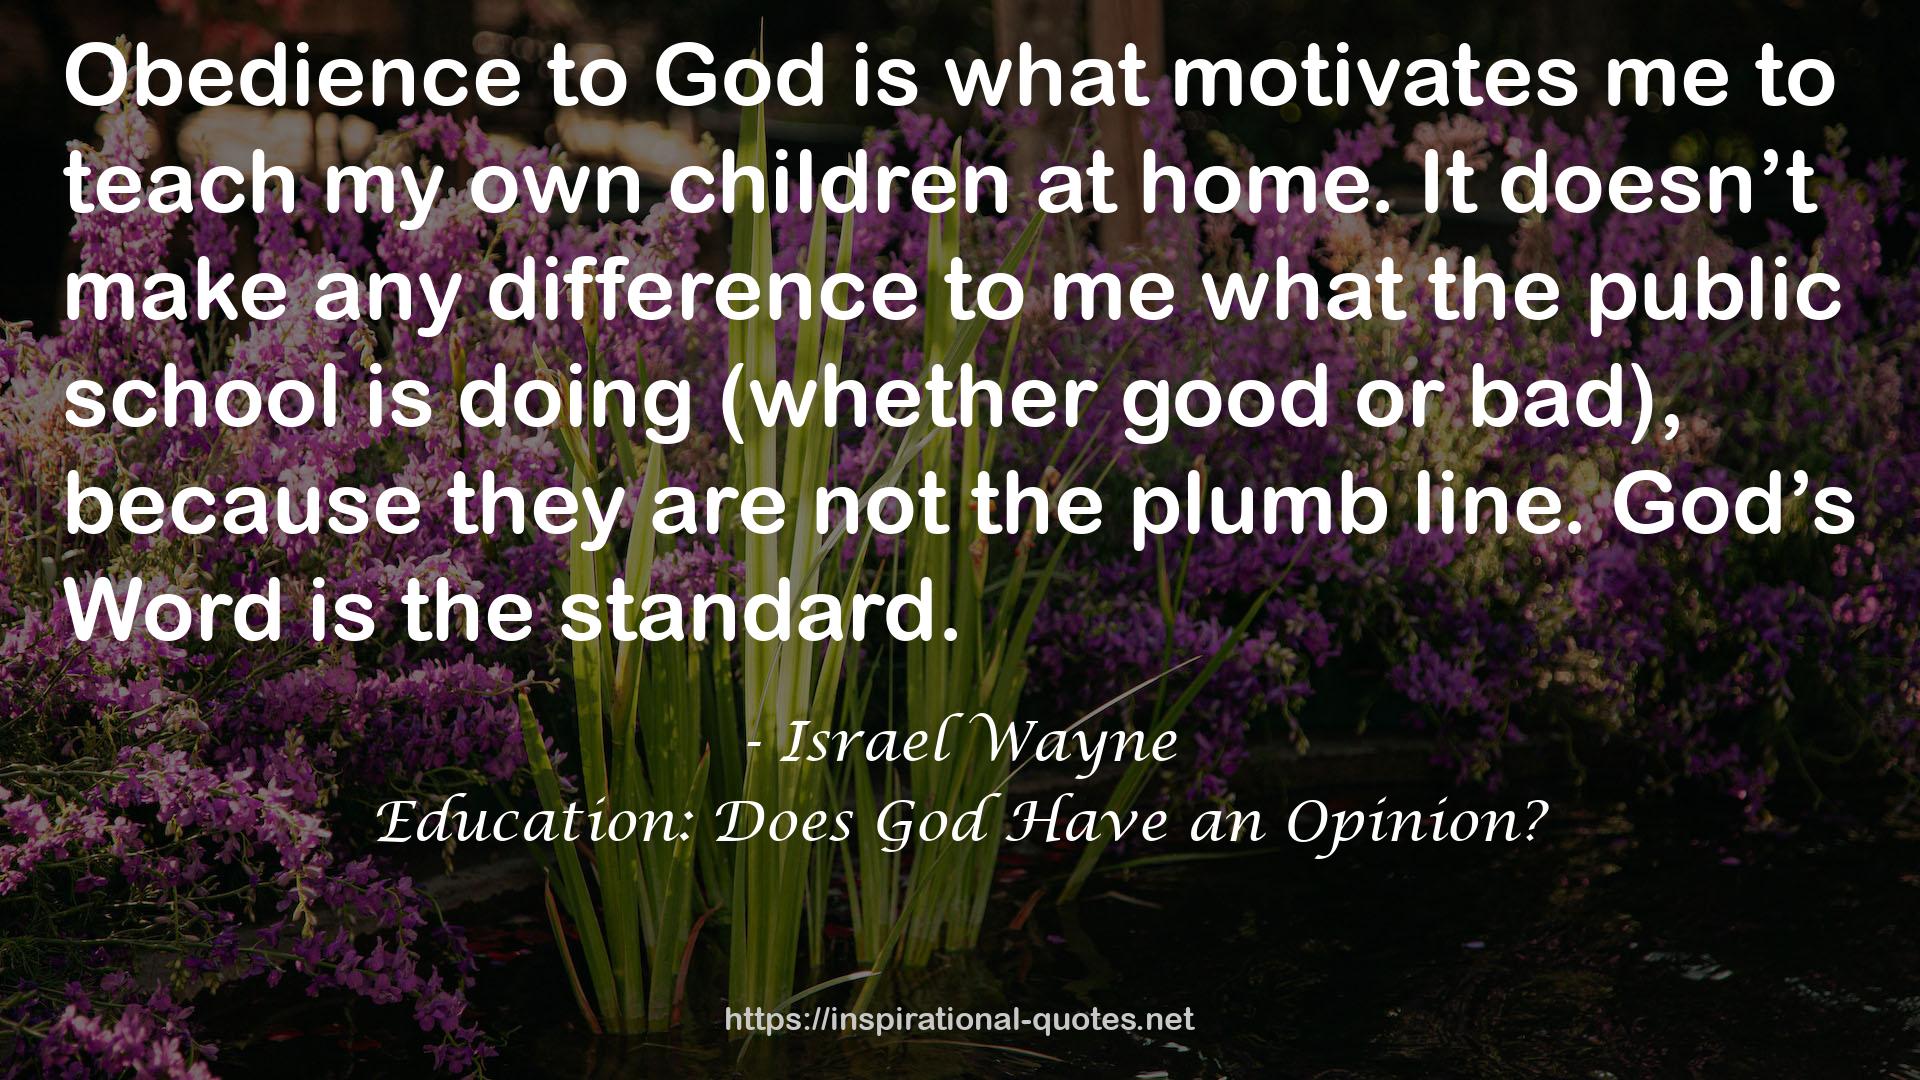 Education: Does God Have an Opinion? QUOTES